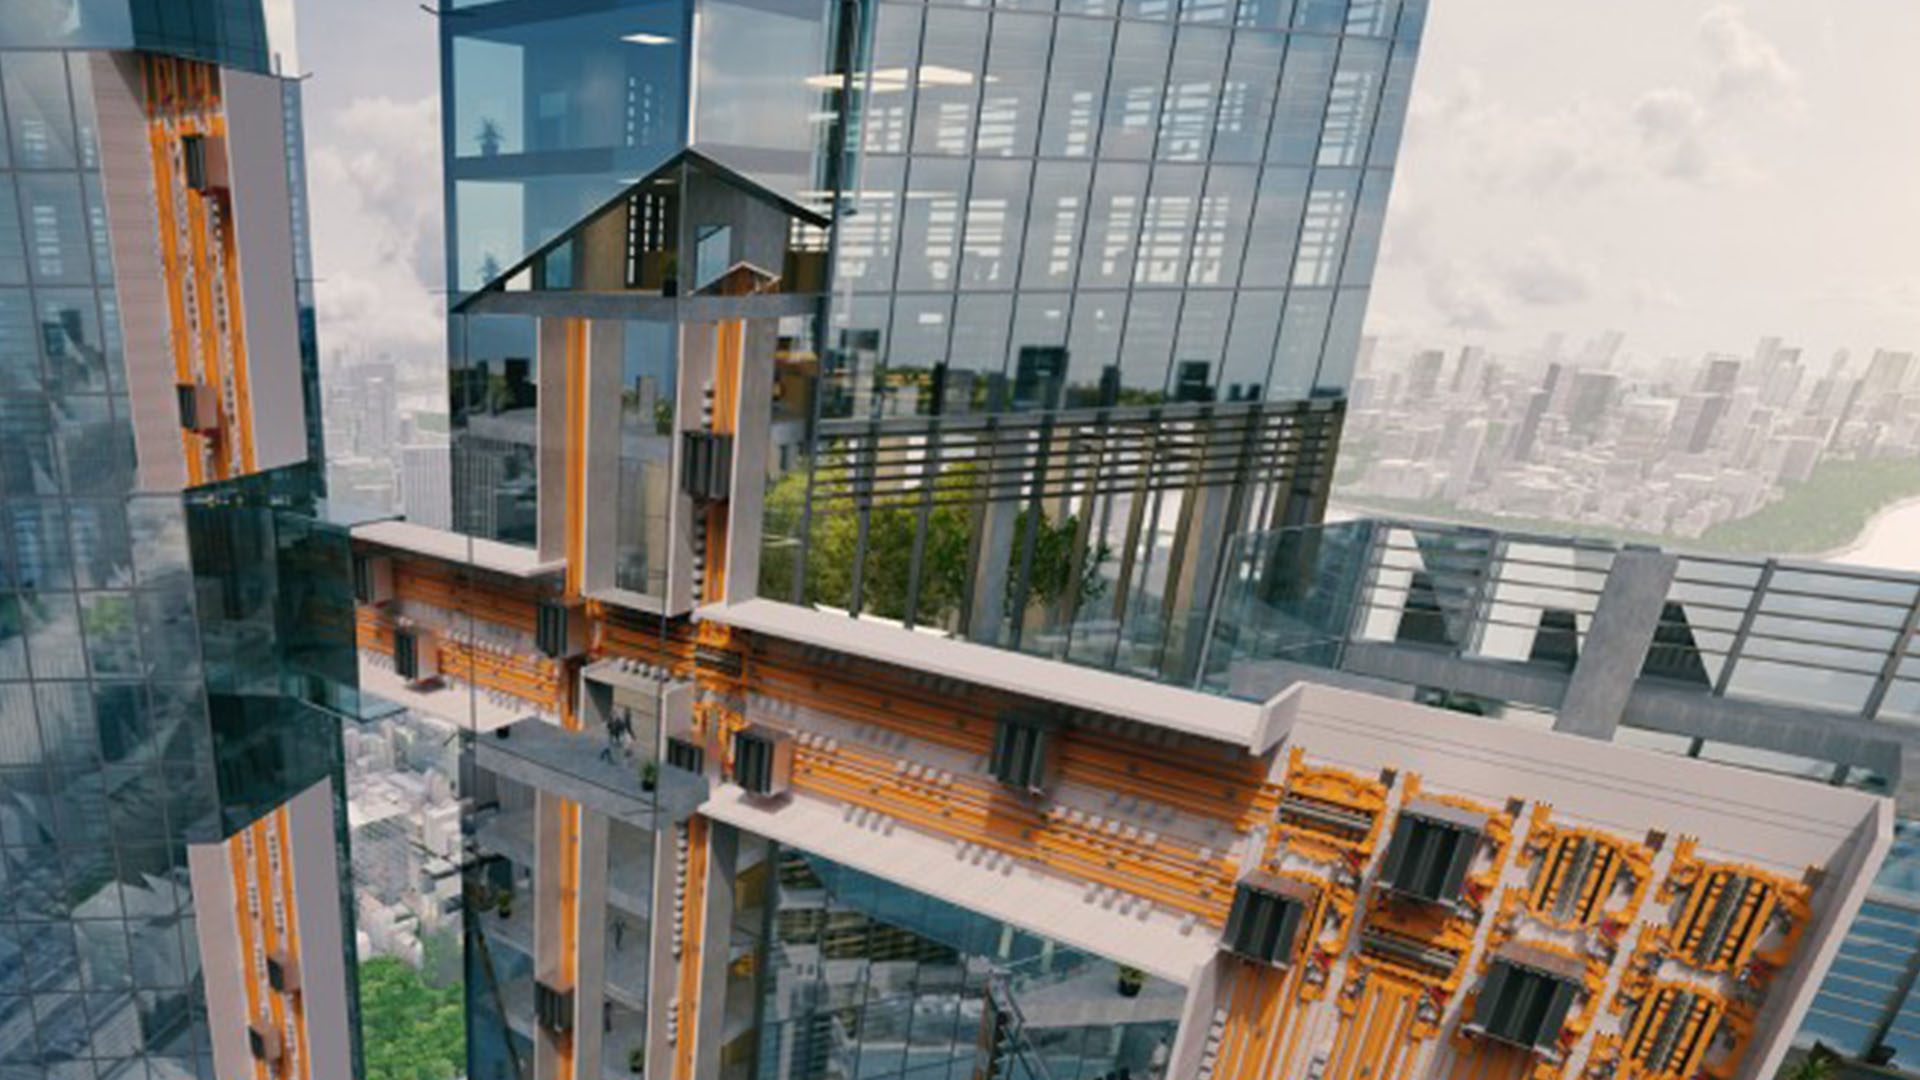 Artist rendering of world's first ropeless elevator that can move vertically and horizontally